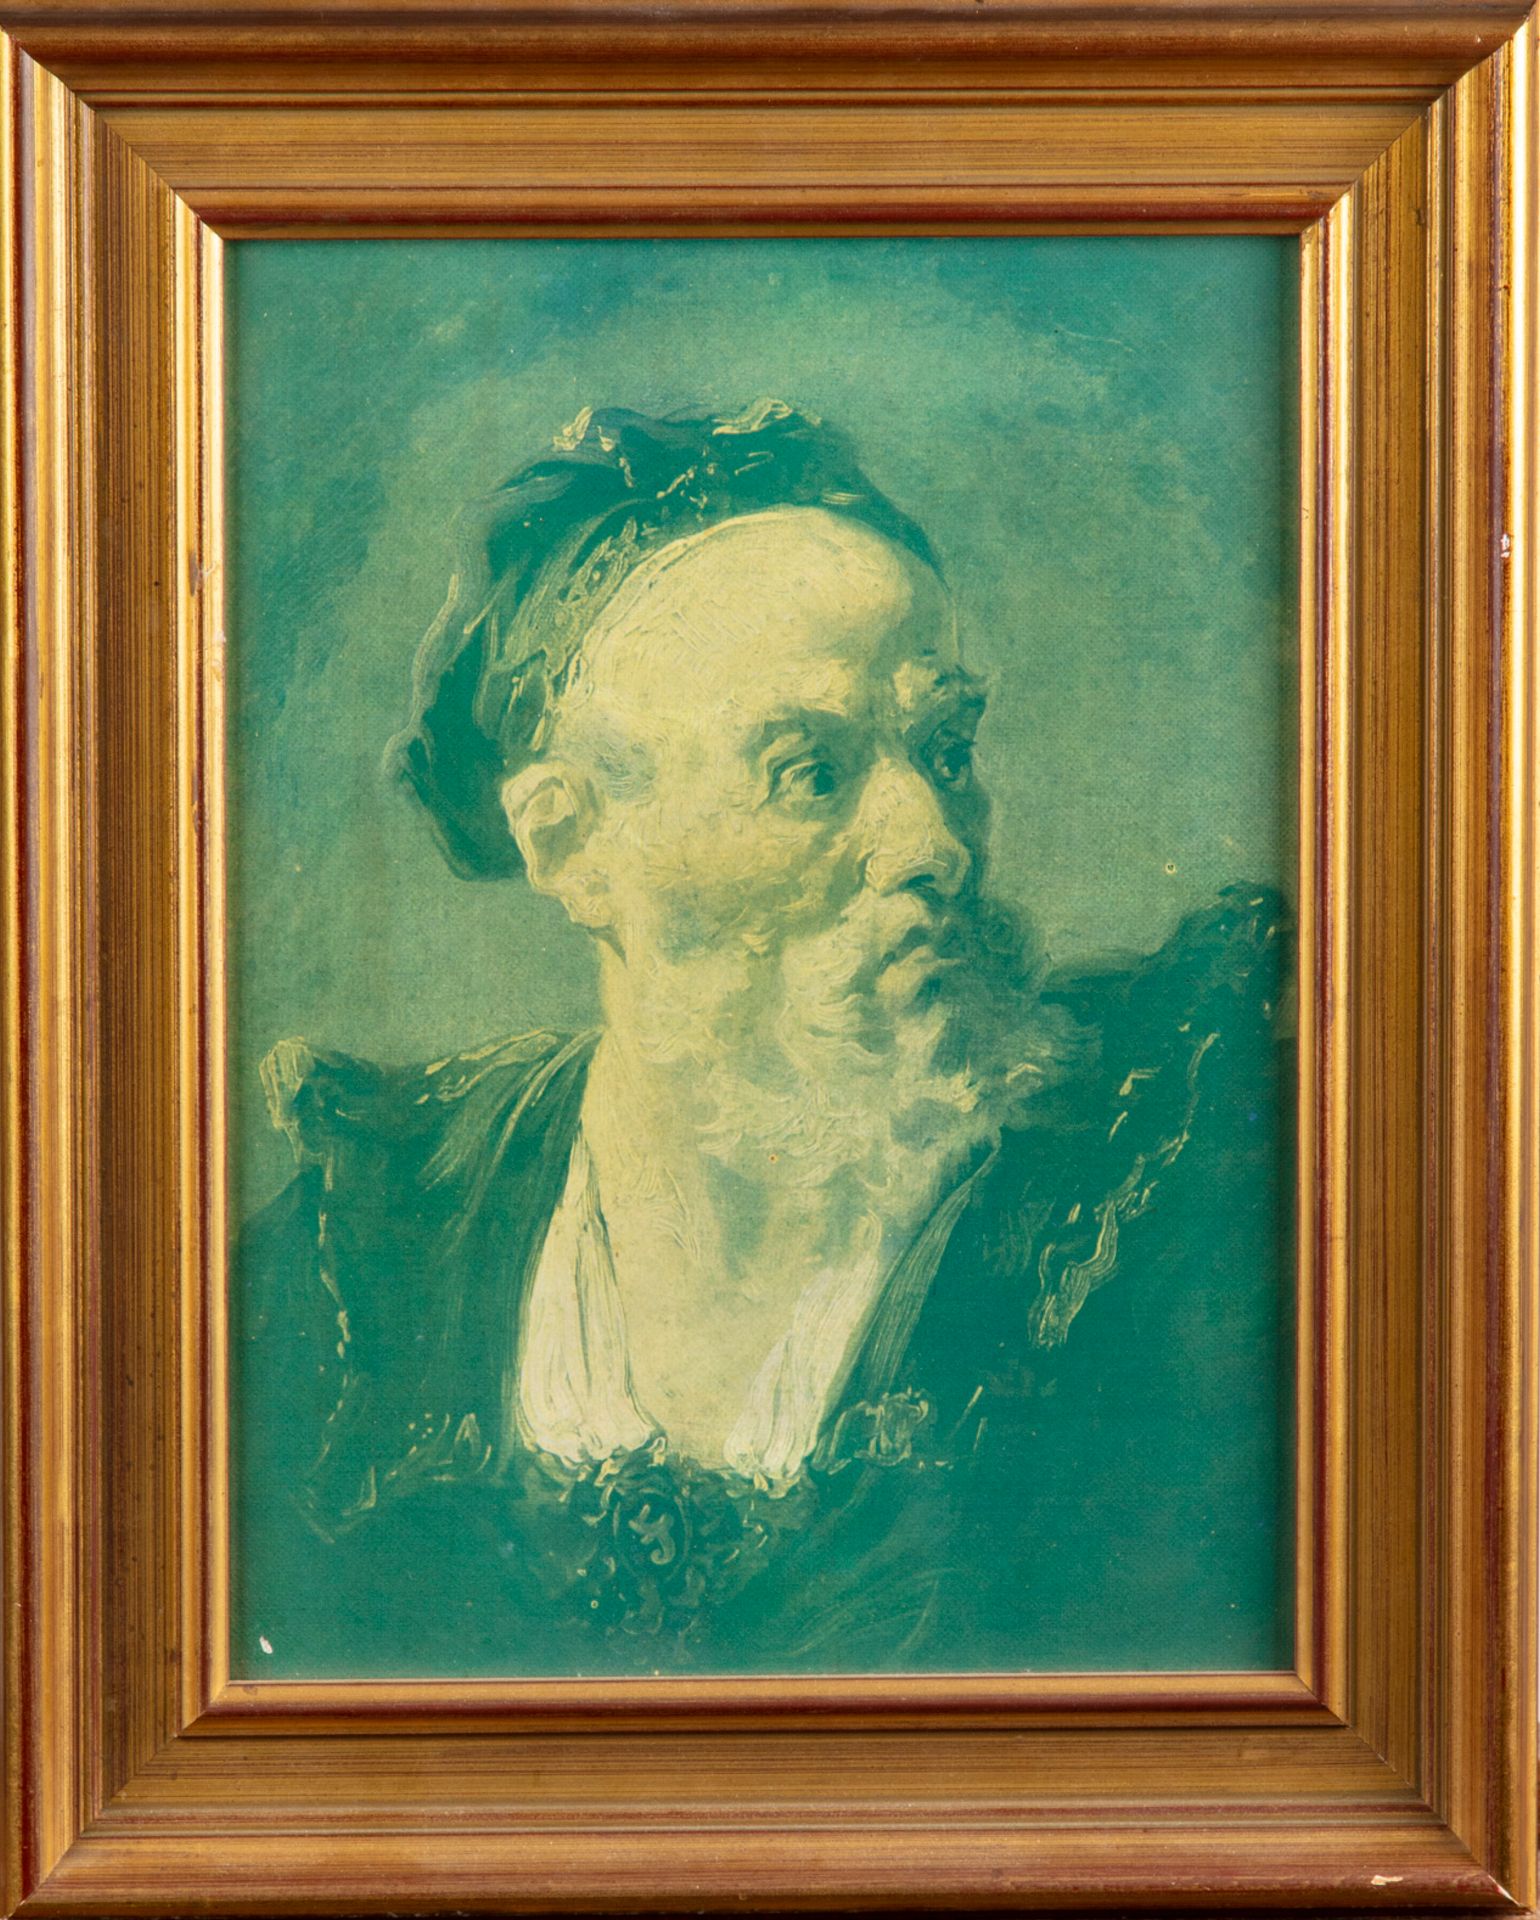 Null Portrait of a man

Chromolithography

27 x 20 cm